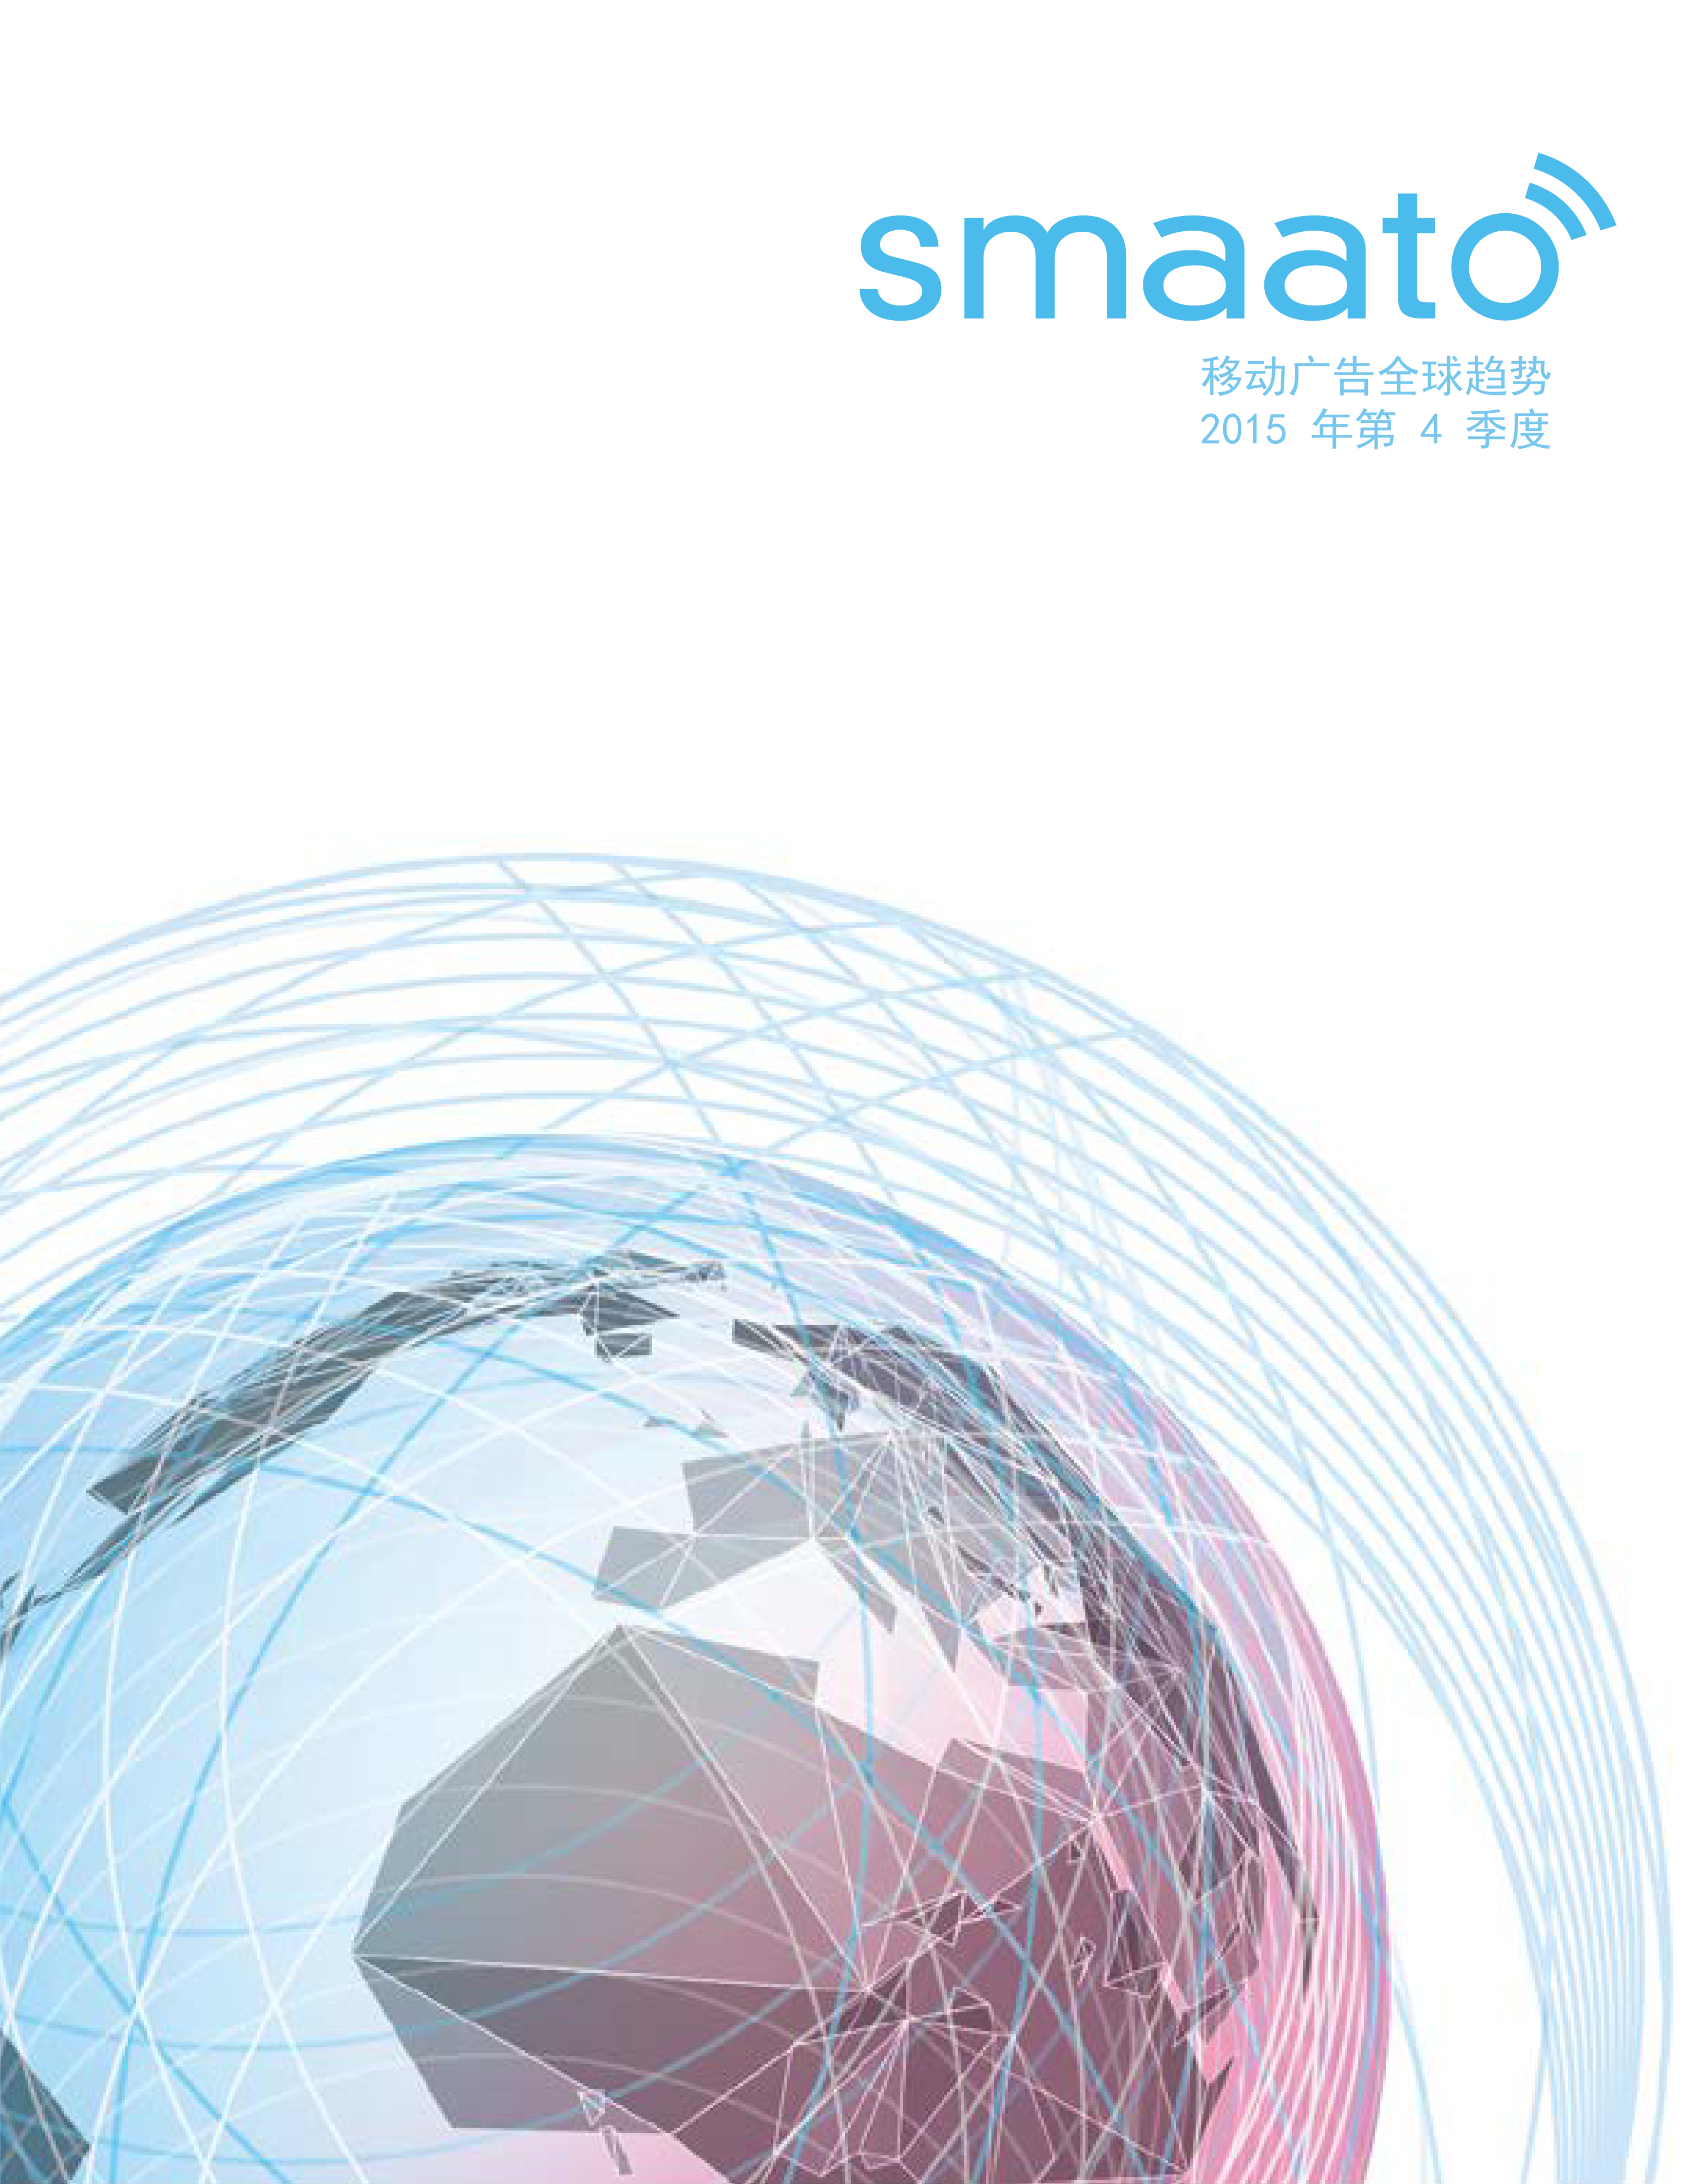 Smaato_Global_Trends_in_Mobile_Advertising_Report_Q4_2015_CN_000001